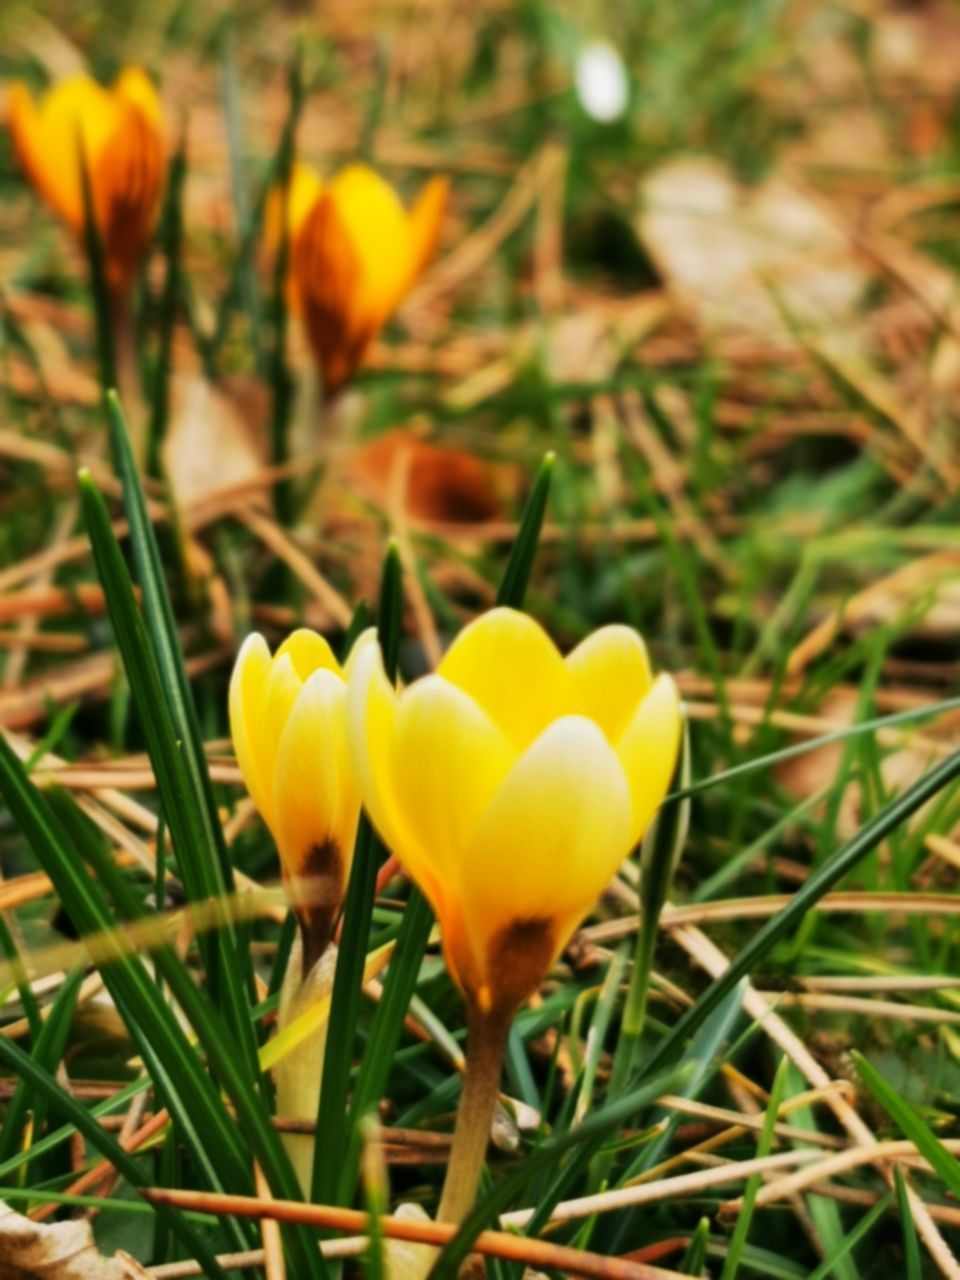 CLOSE-UP OF YELLOW CROCUS FLOWERS IN FIELD